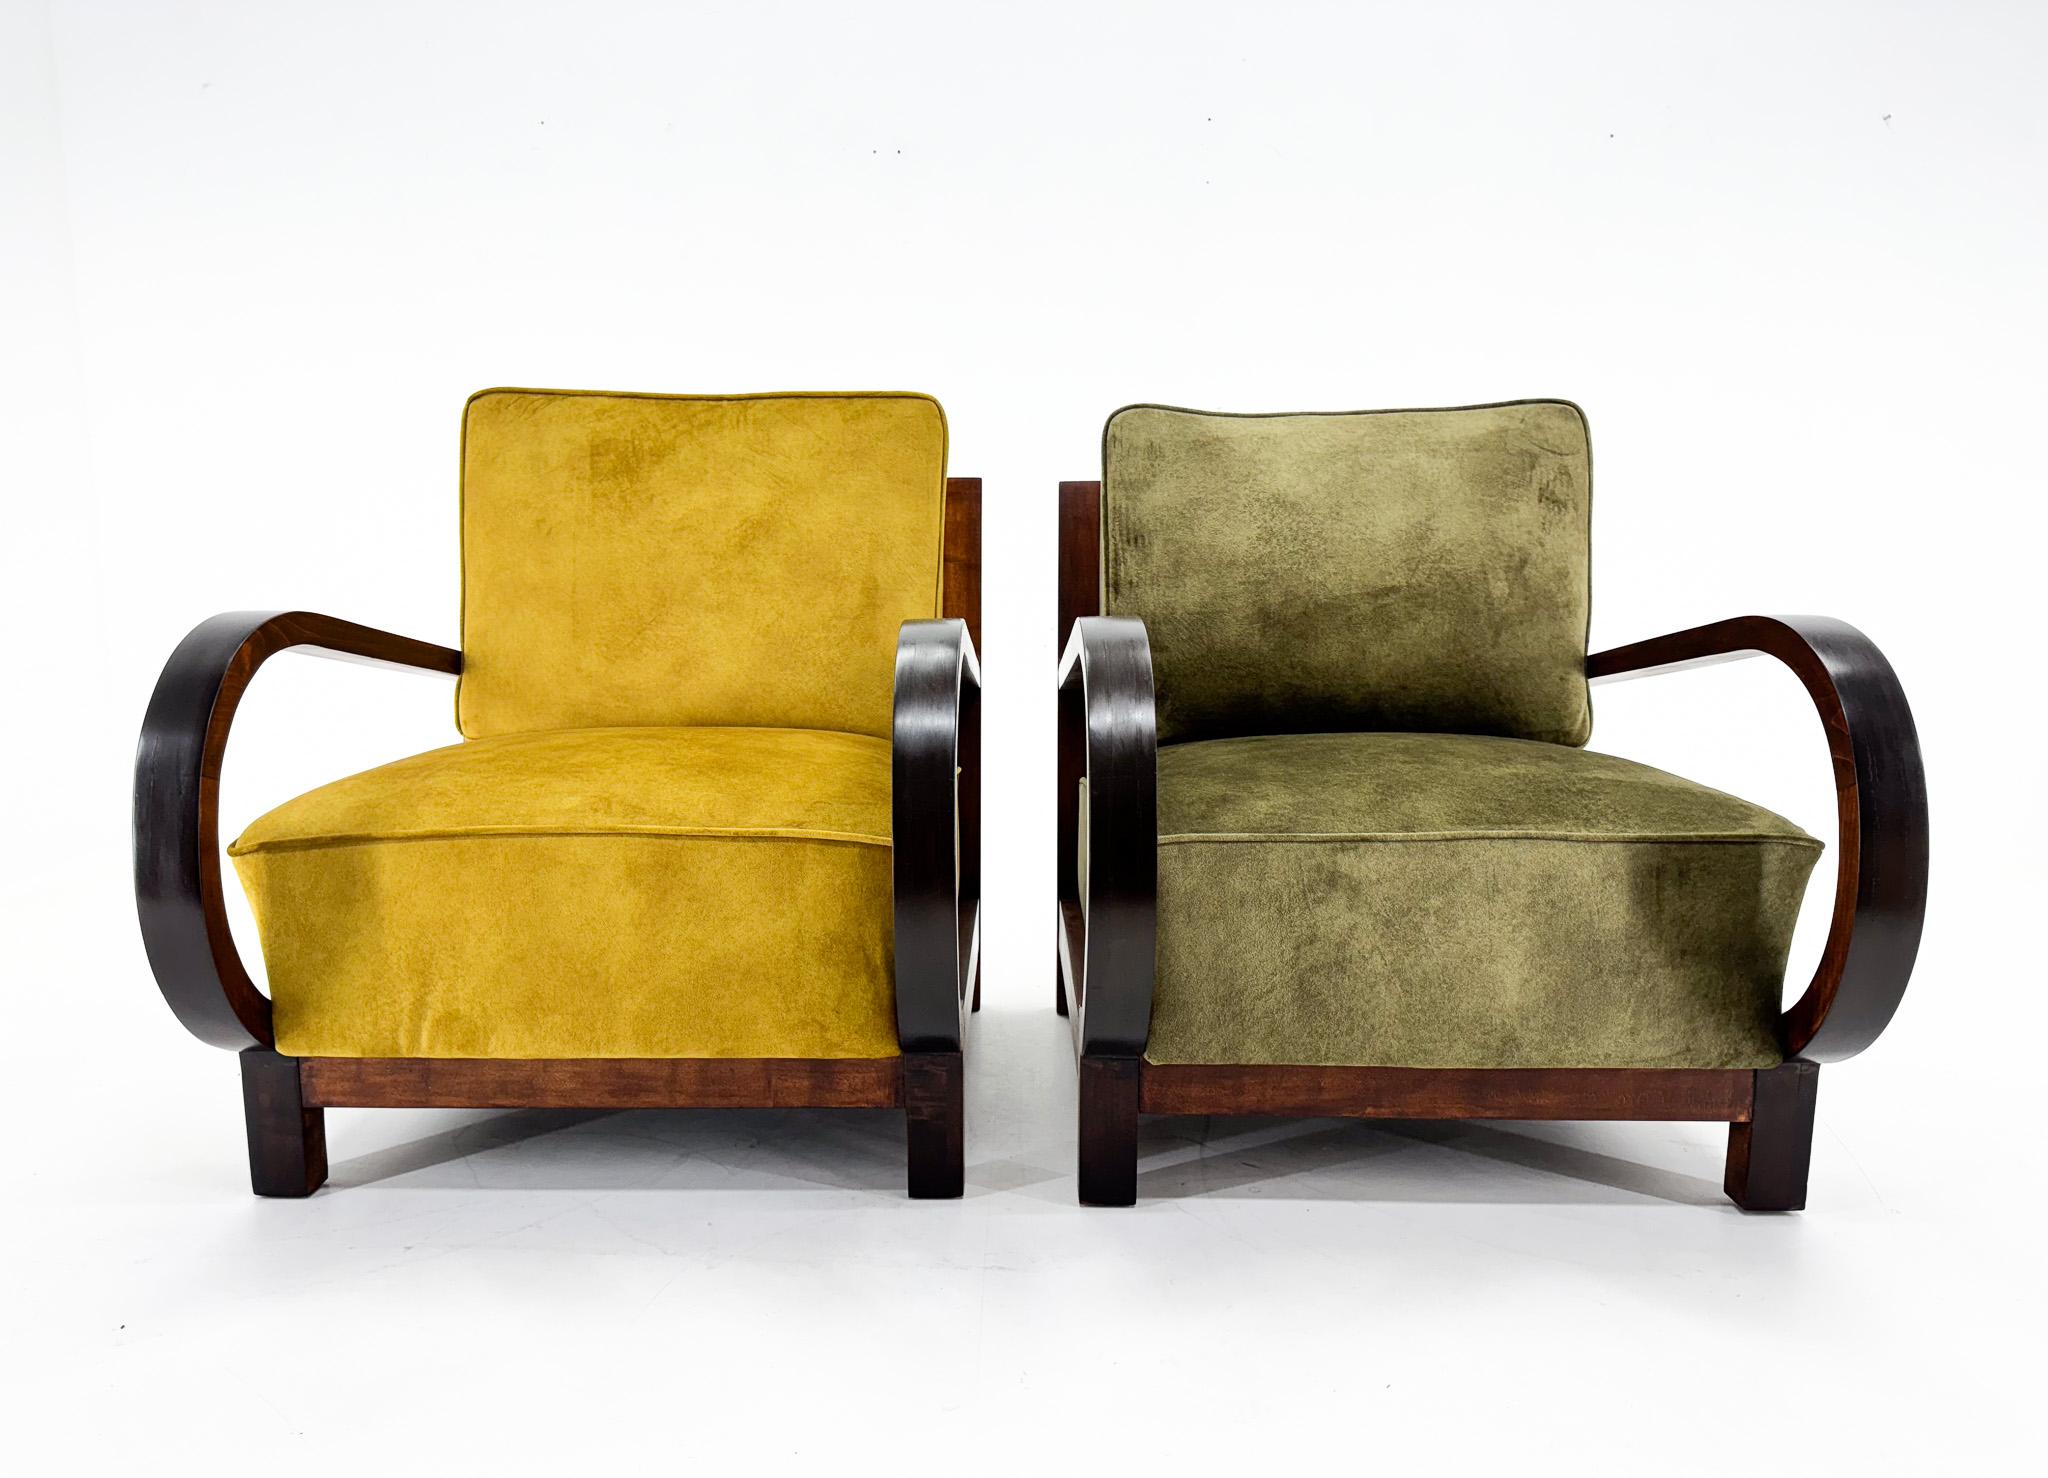 Set of two art deco armchairs. The wooden parts have been carefully restored. The armchairs are newly upholstered in velvet fabric. The cushions can be easily interchanged so you can combine the two colours.

